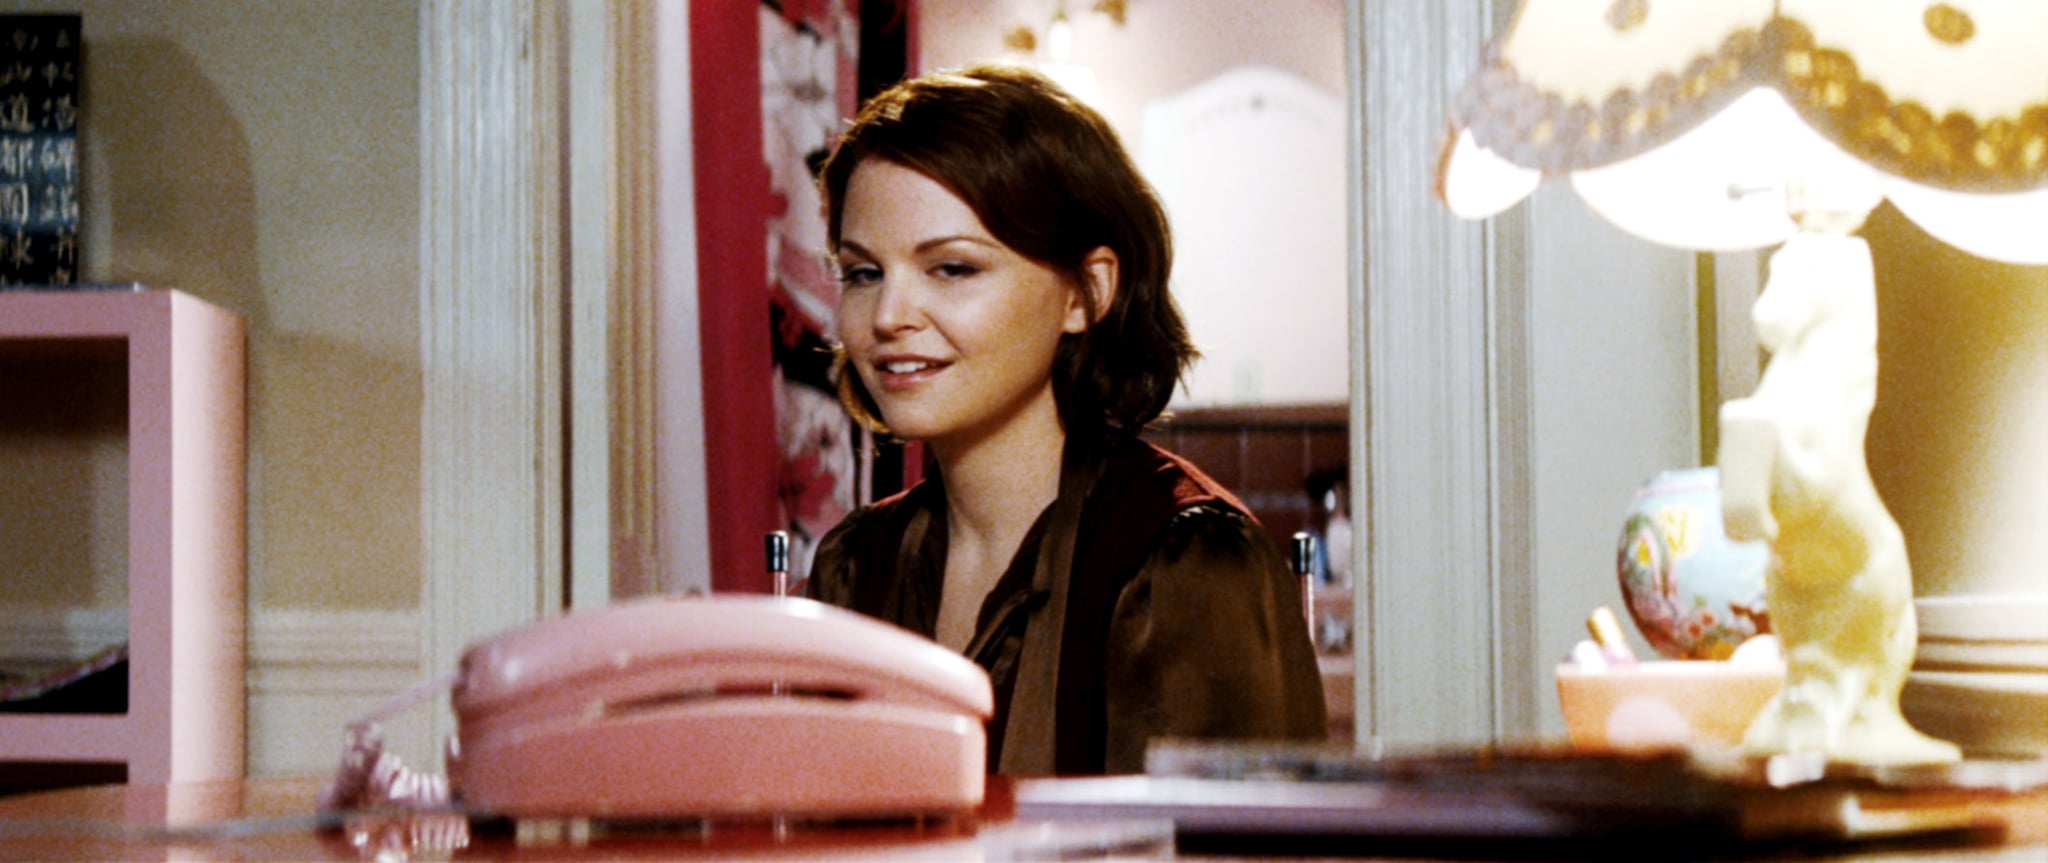 HE'S JUST NOT THAT INTO YOU, Ginnifer Goodwin, 2009. New Line Cinema/Courtesy Everett Collection